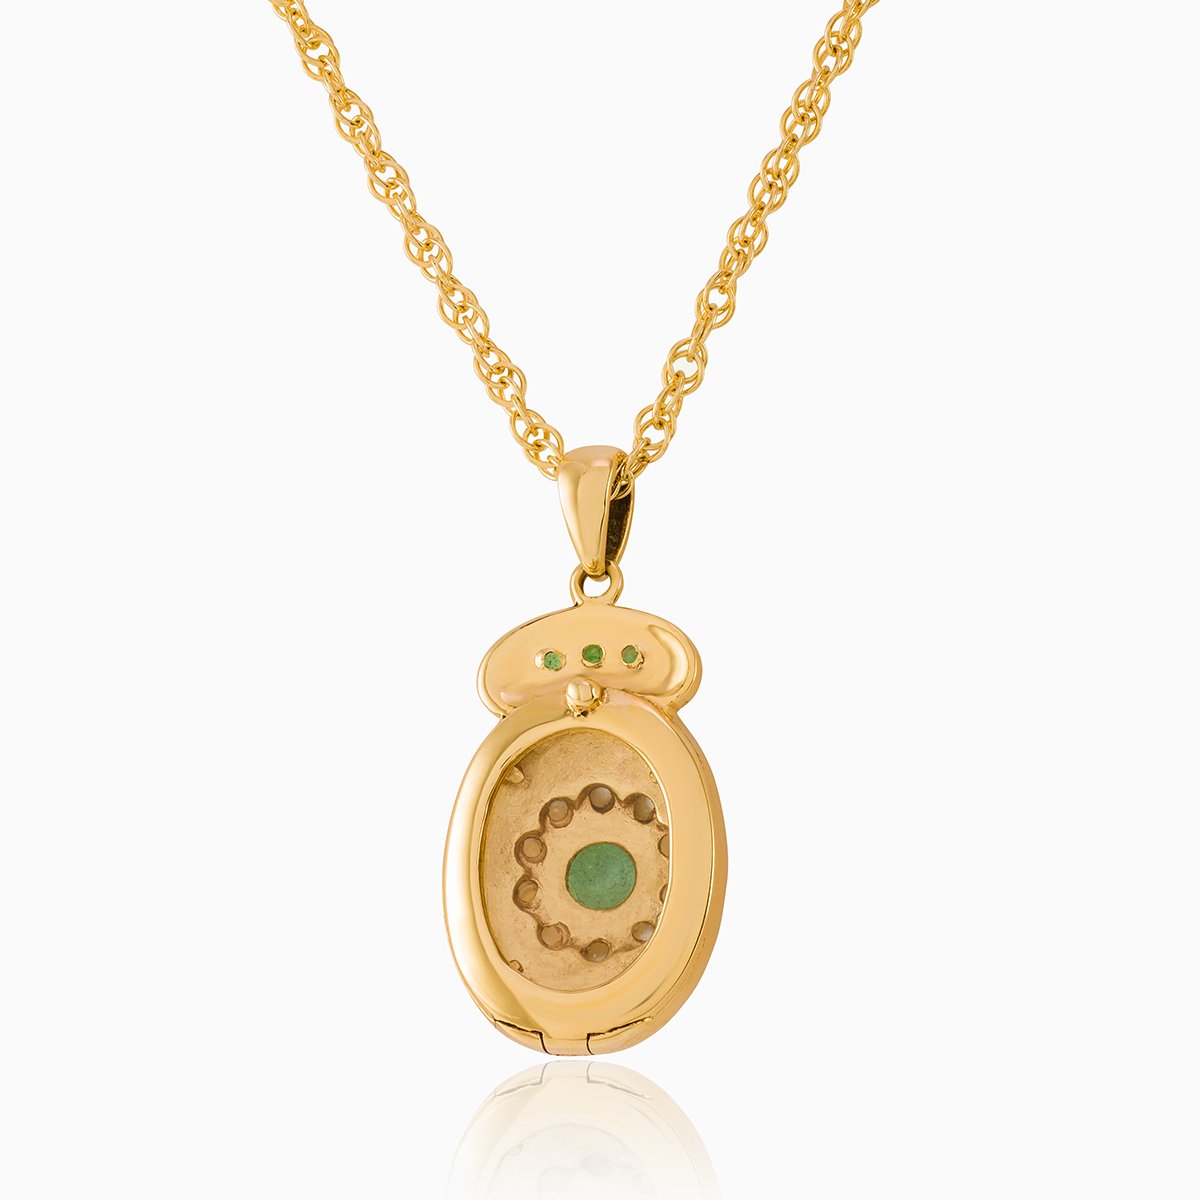 Product title: Emerald Crown Locket, product type: Locket